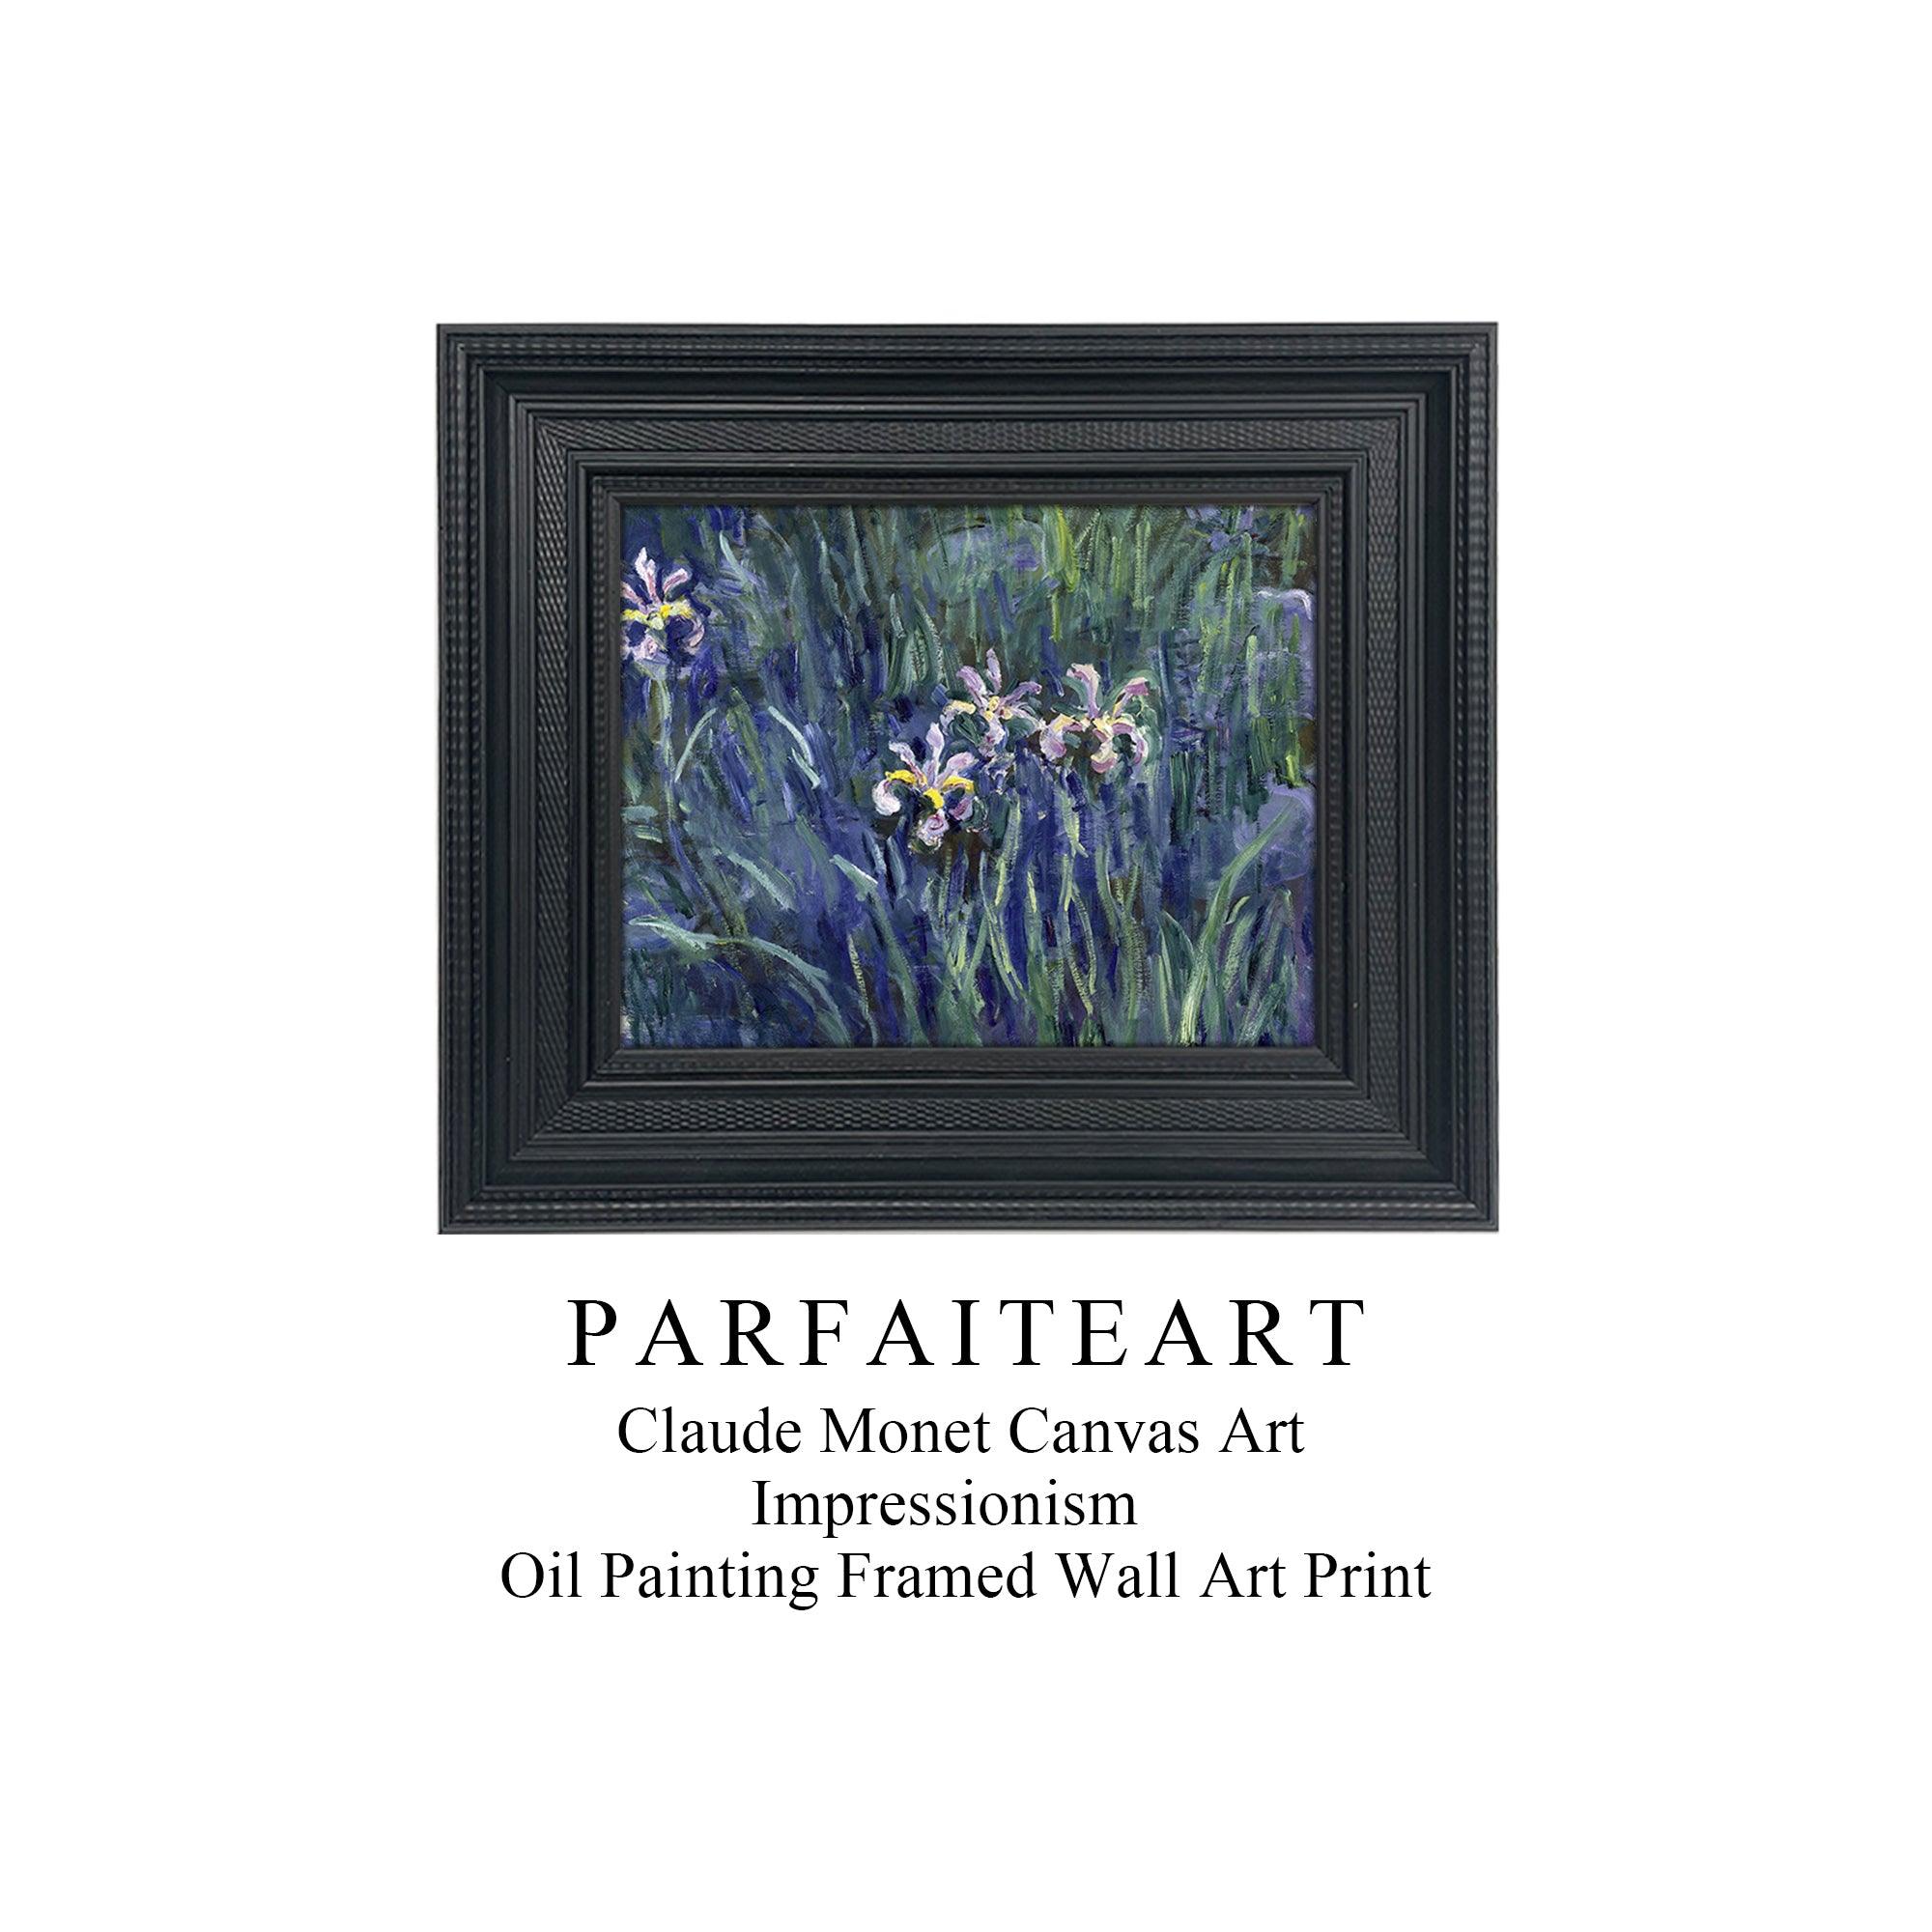 Famous Painting Print，Claude Monet，Moody Wall Decor，Black Vintage Frame,Solid Wood,High-Quality Waterproof Decorative Canvas Art， Hotel Aisle Living Room Home Decor Art 18x15 inches 4 Black